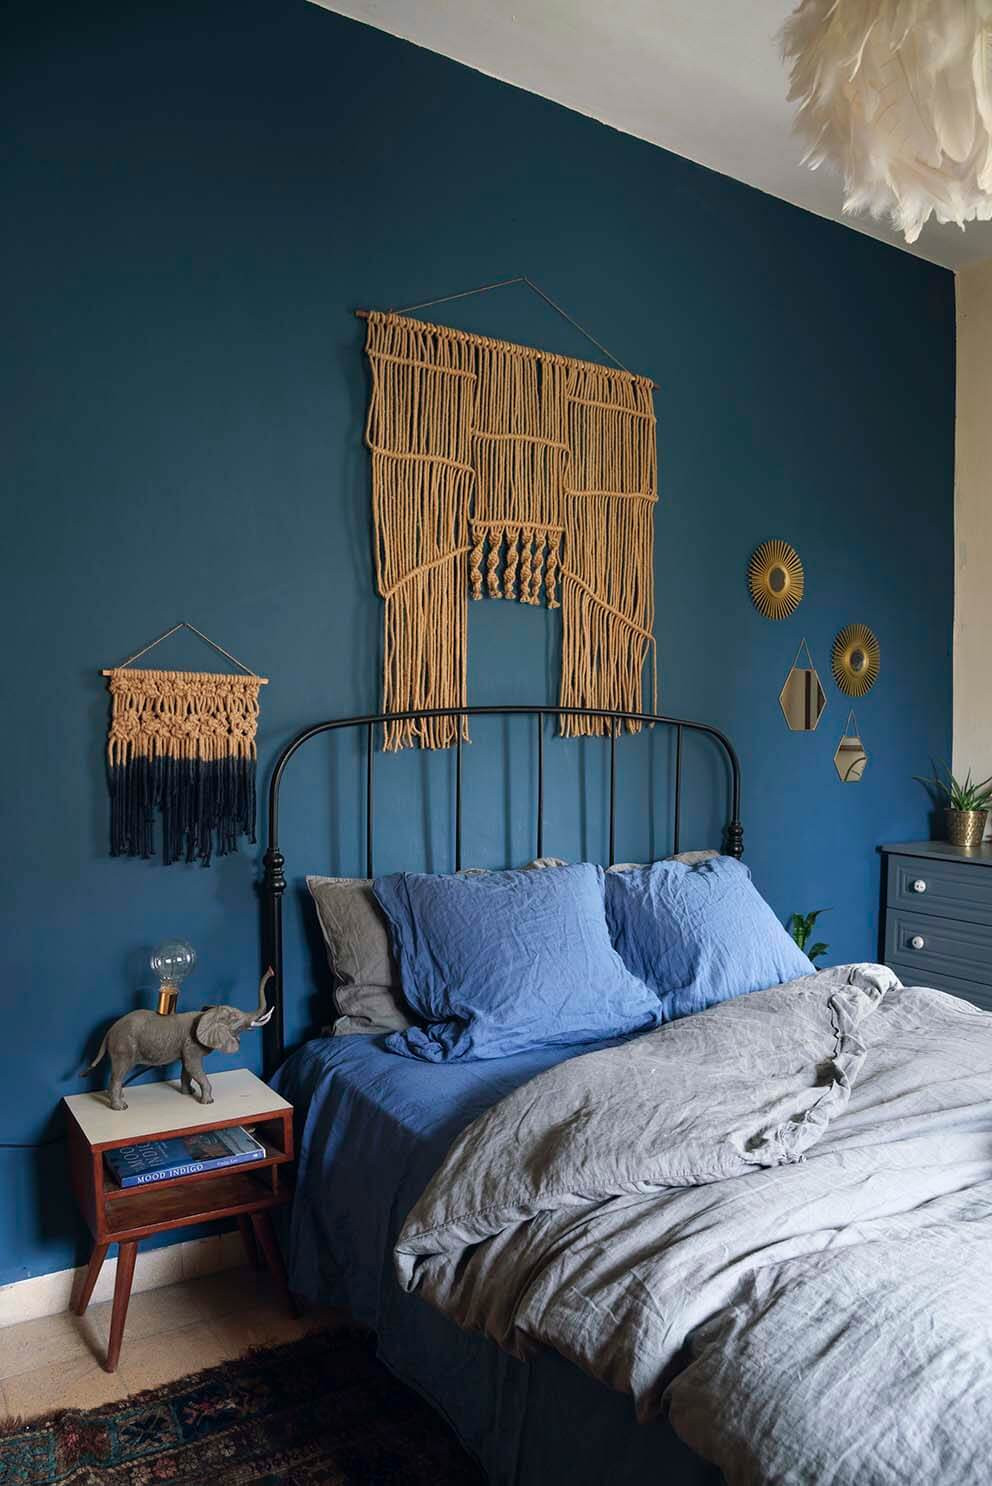 Blue Wall Art For Bedroom
 This Is How To Decorate With Blue Walls